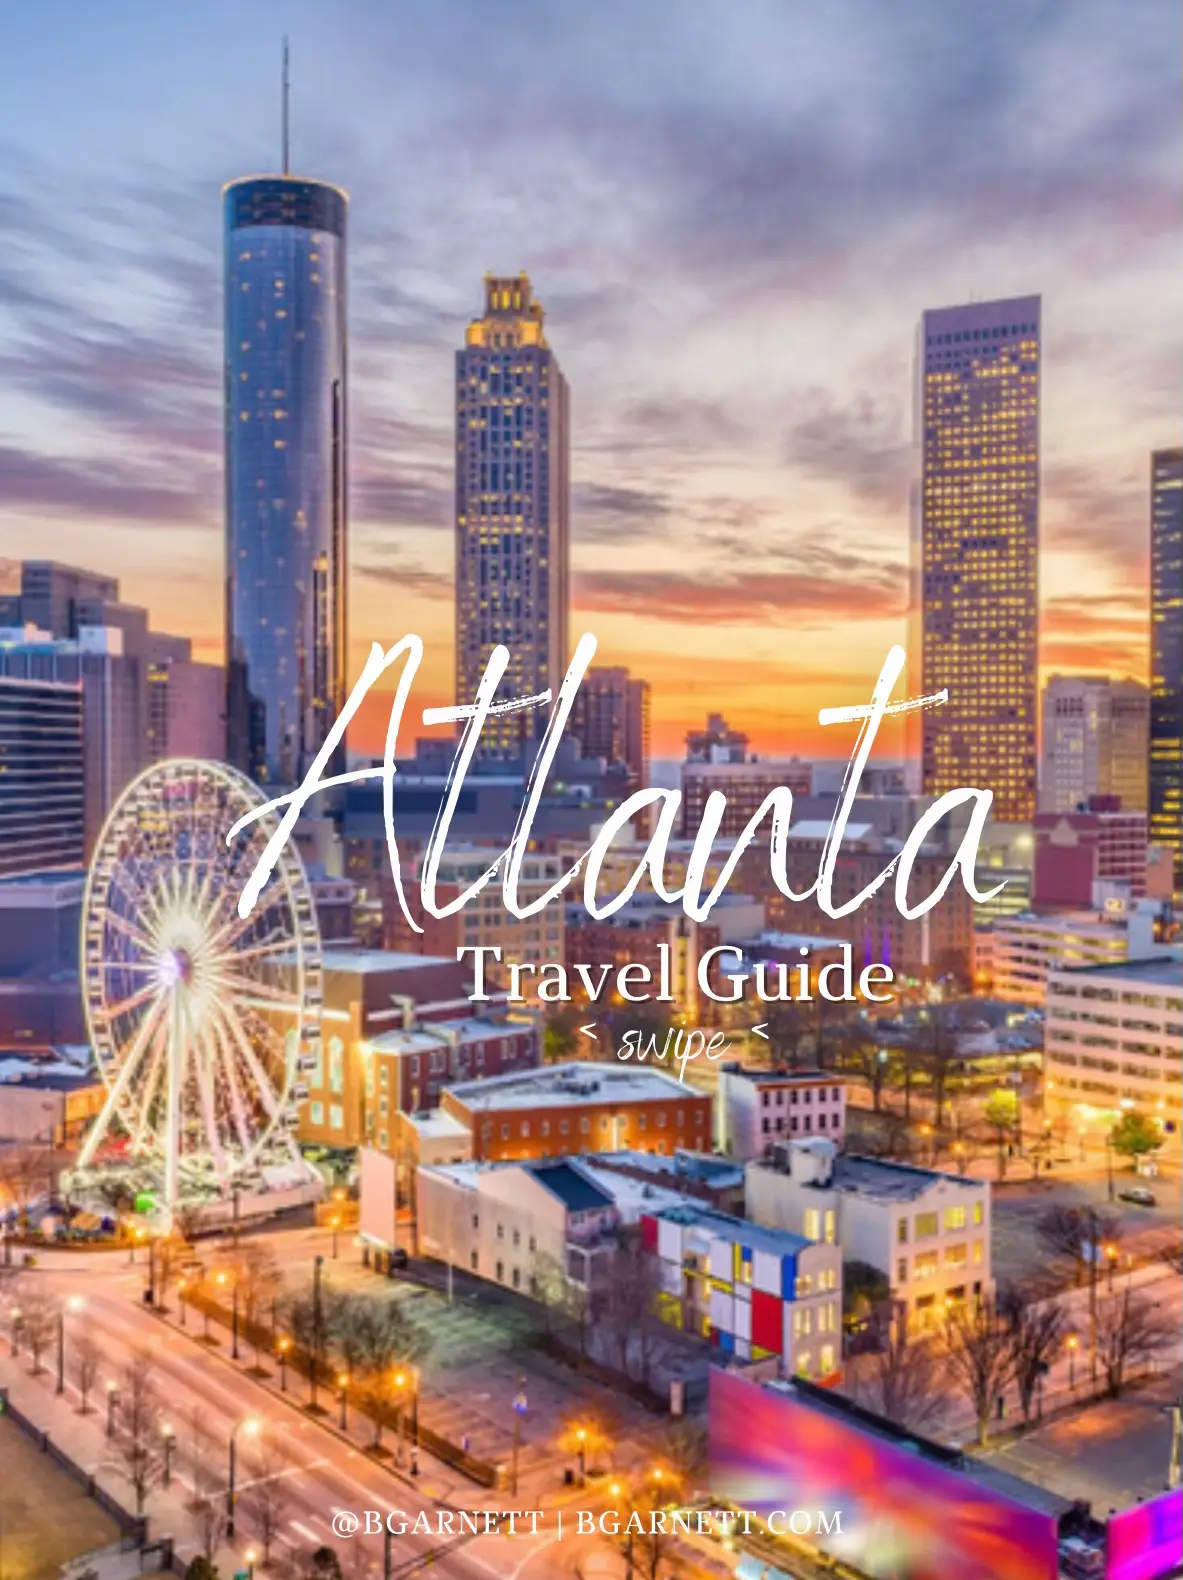 Bookmark For Your Next Trip To Atlanta 's images